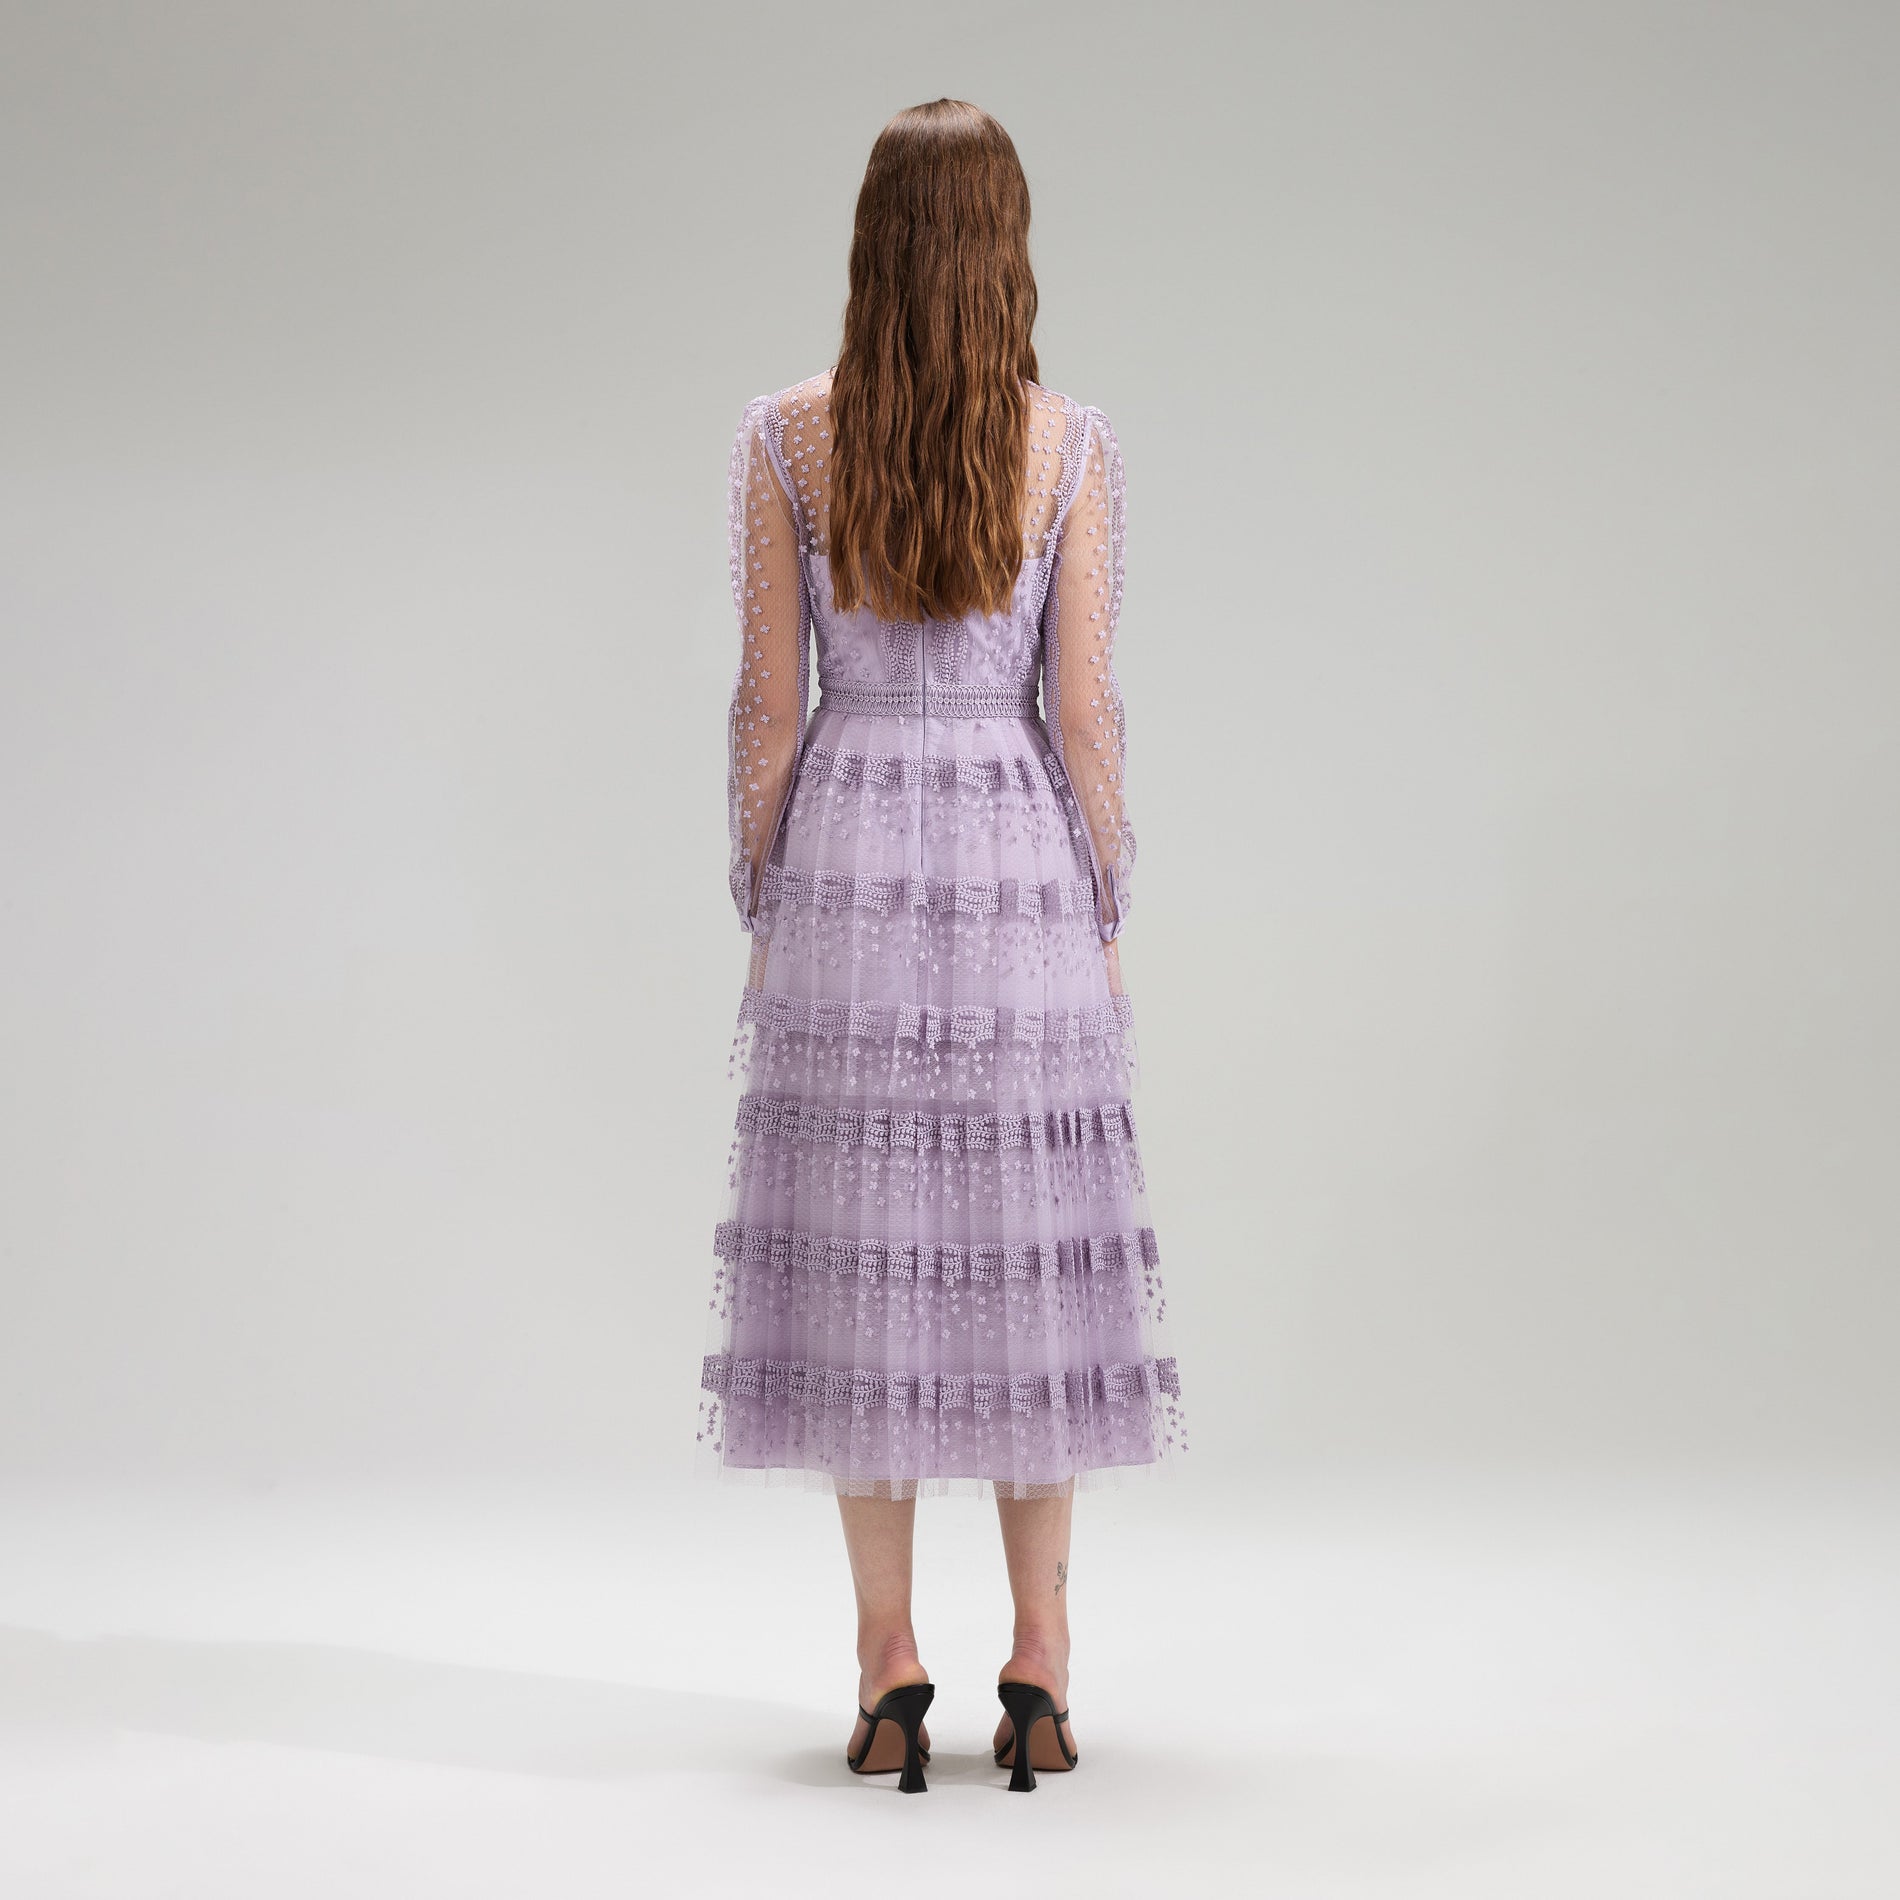 A woman wearing the Lilac Tiered Lace Midi Dress